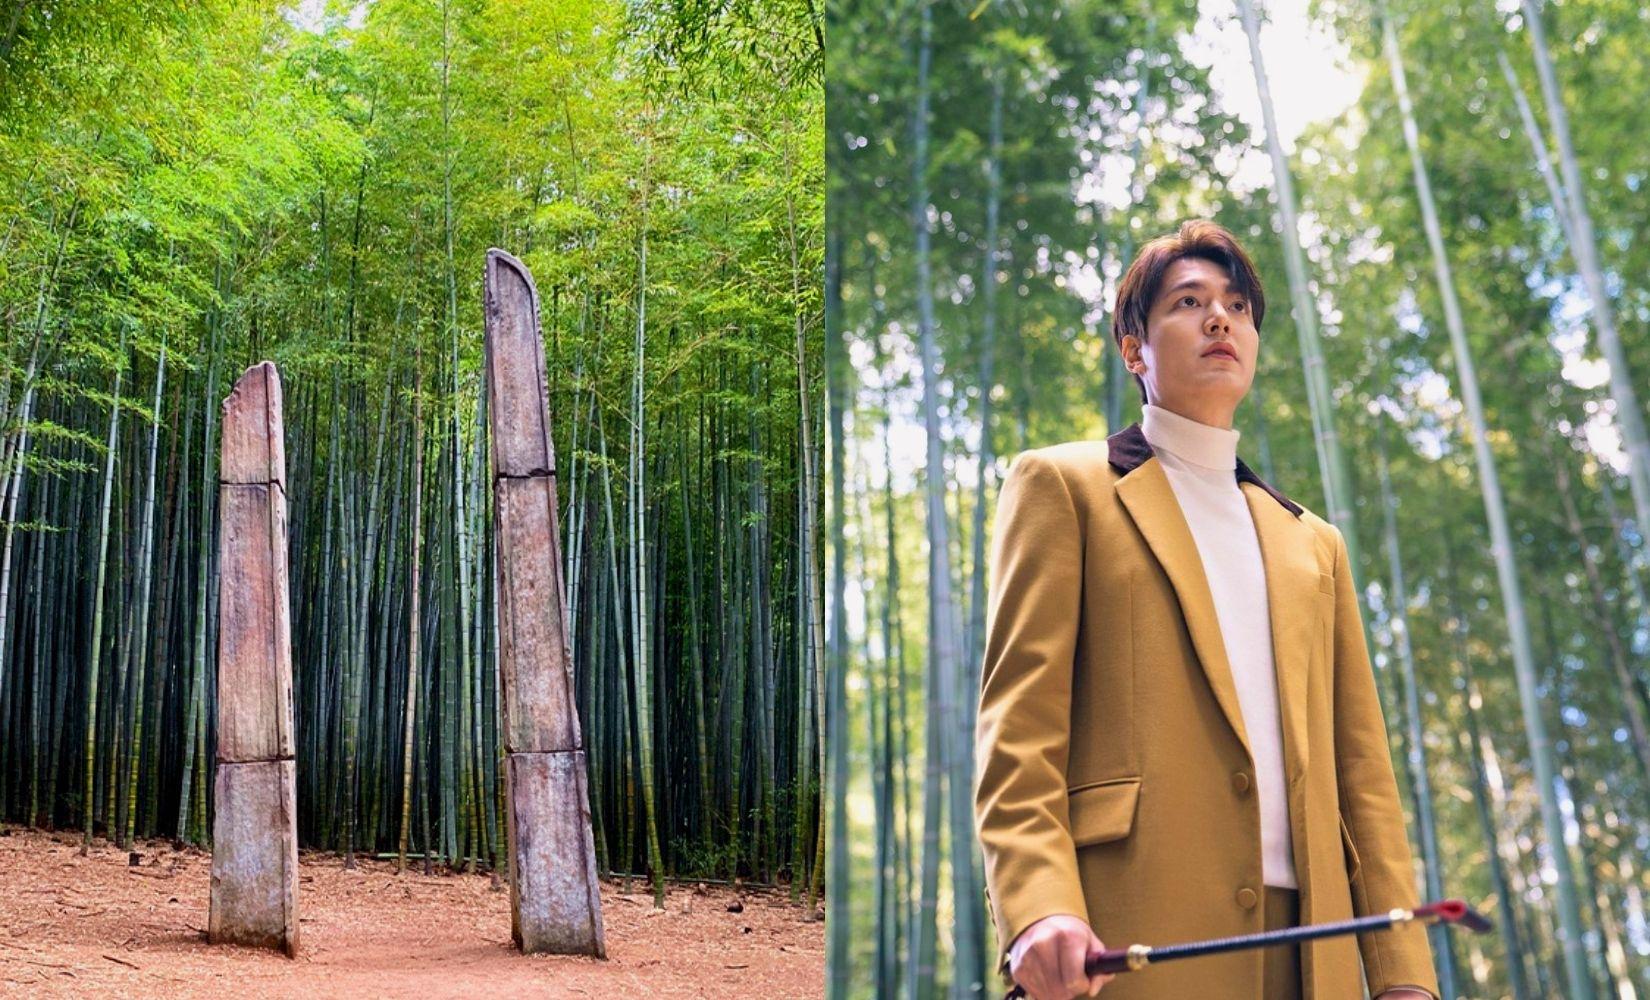 Busan Ahopsan Forest | Bamboo Forest Used As A Filming Location For Korean Movies & Dramas